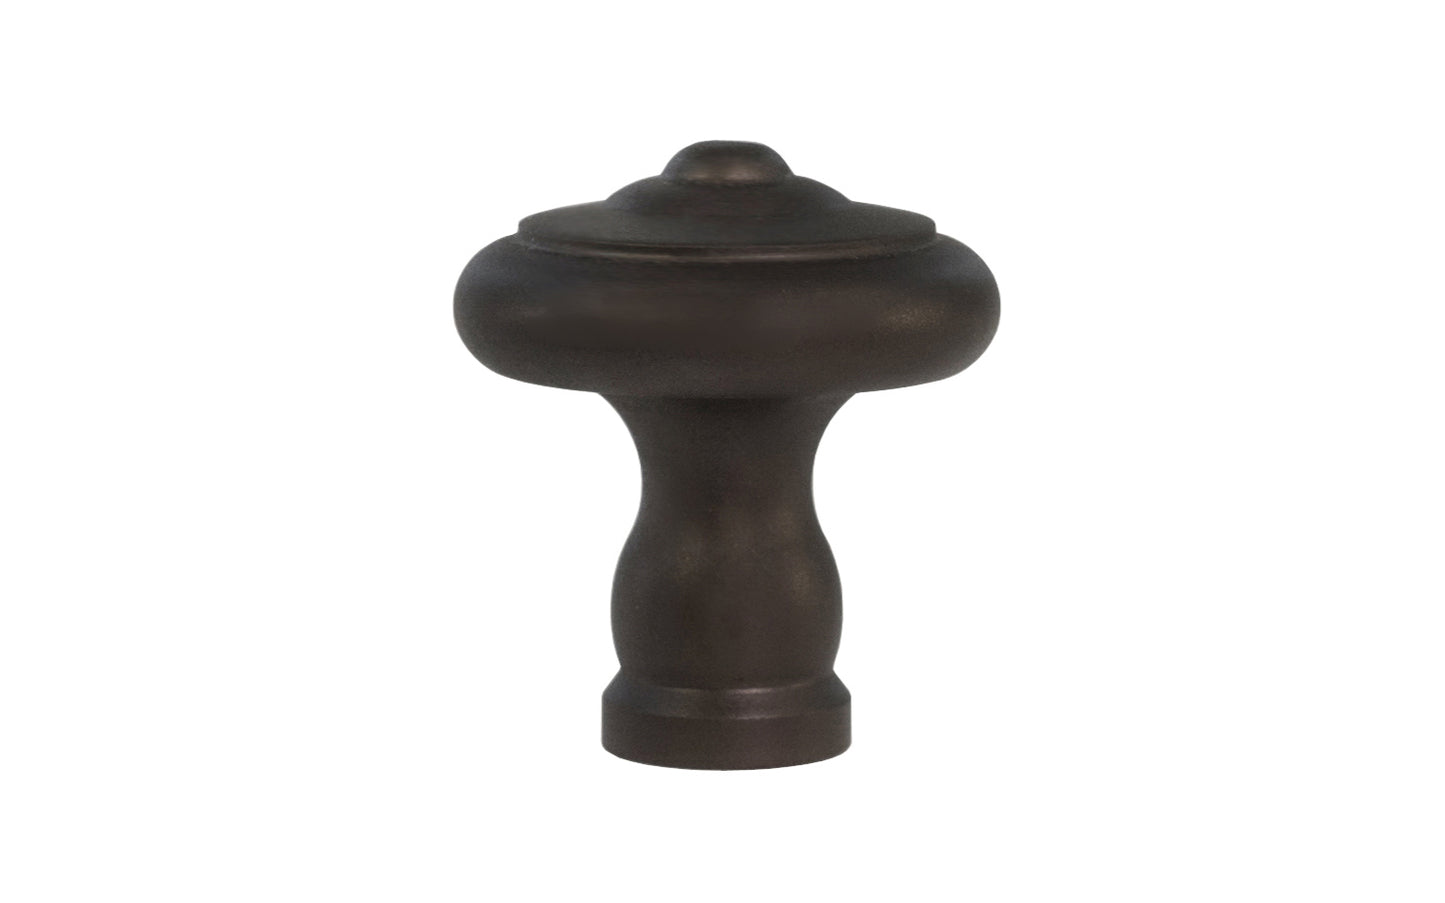 Vintage-style Hardware · Solid Brass classic contemporary style cabinet knob designed in the Mid-Century style. Quality solid brass 1" diameter Knob. Ideal for kitchen & bathroom cabinets, & furniture. Oil rubbed bronze finish.